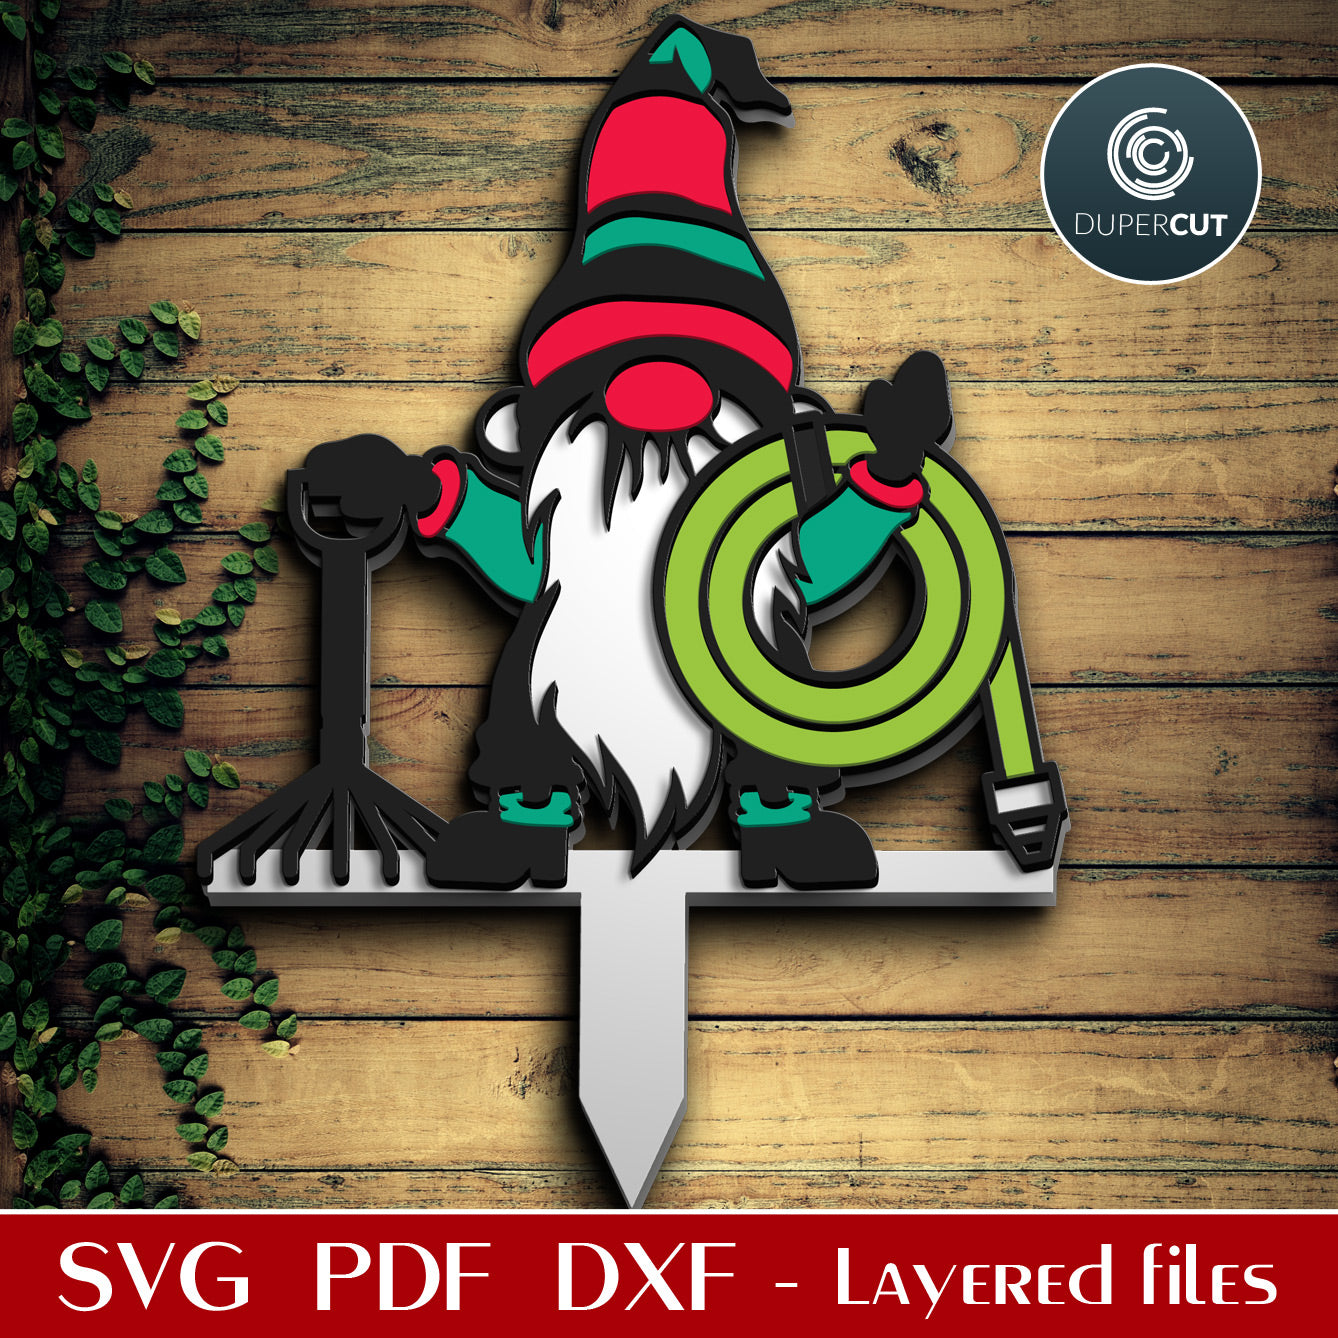 Cute garden gnome DIY yard decoration template - SVG DXF layered cutting files for Glowforge, Cricut, Silhouette cameo, CNC pattern by DuperCut.com